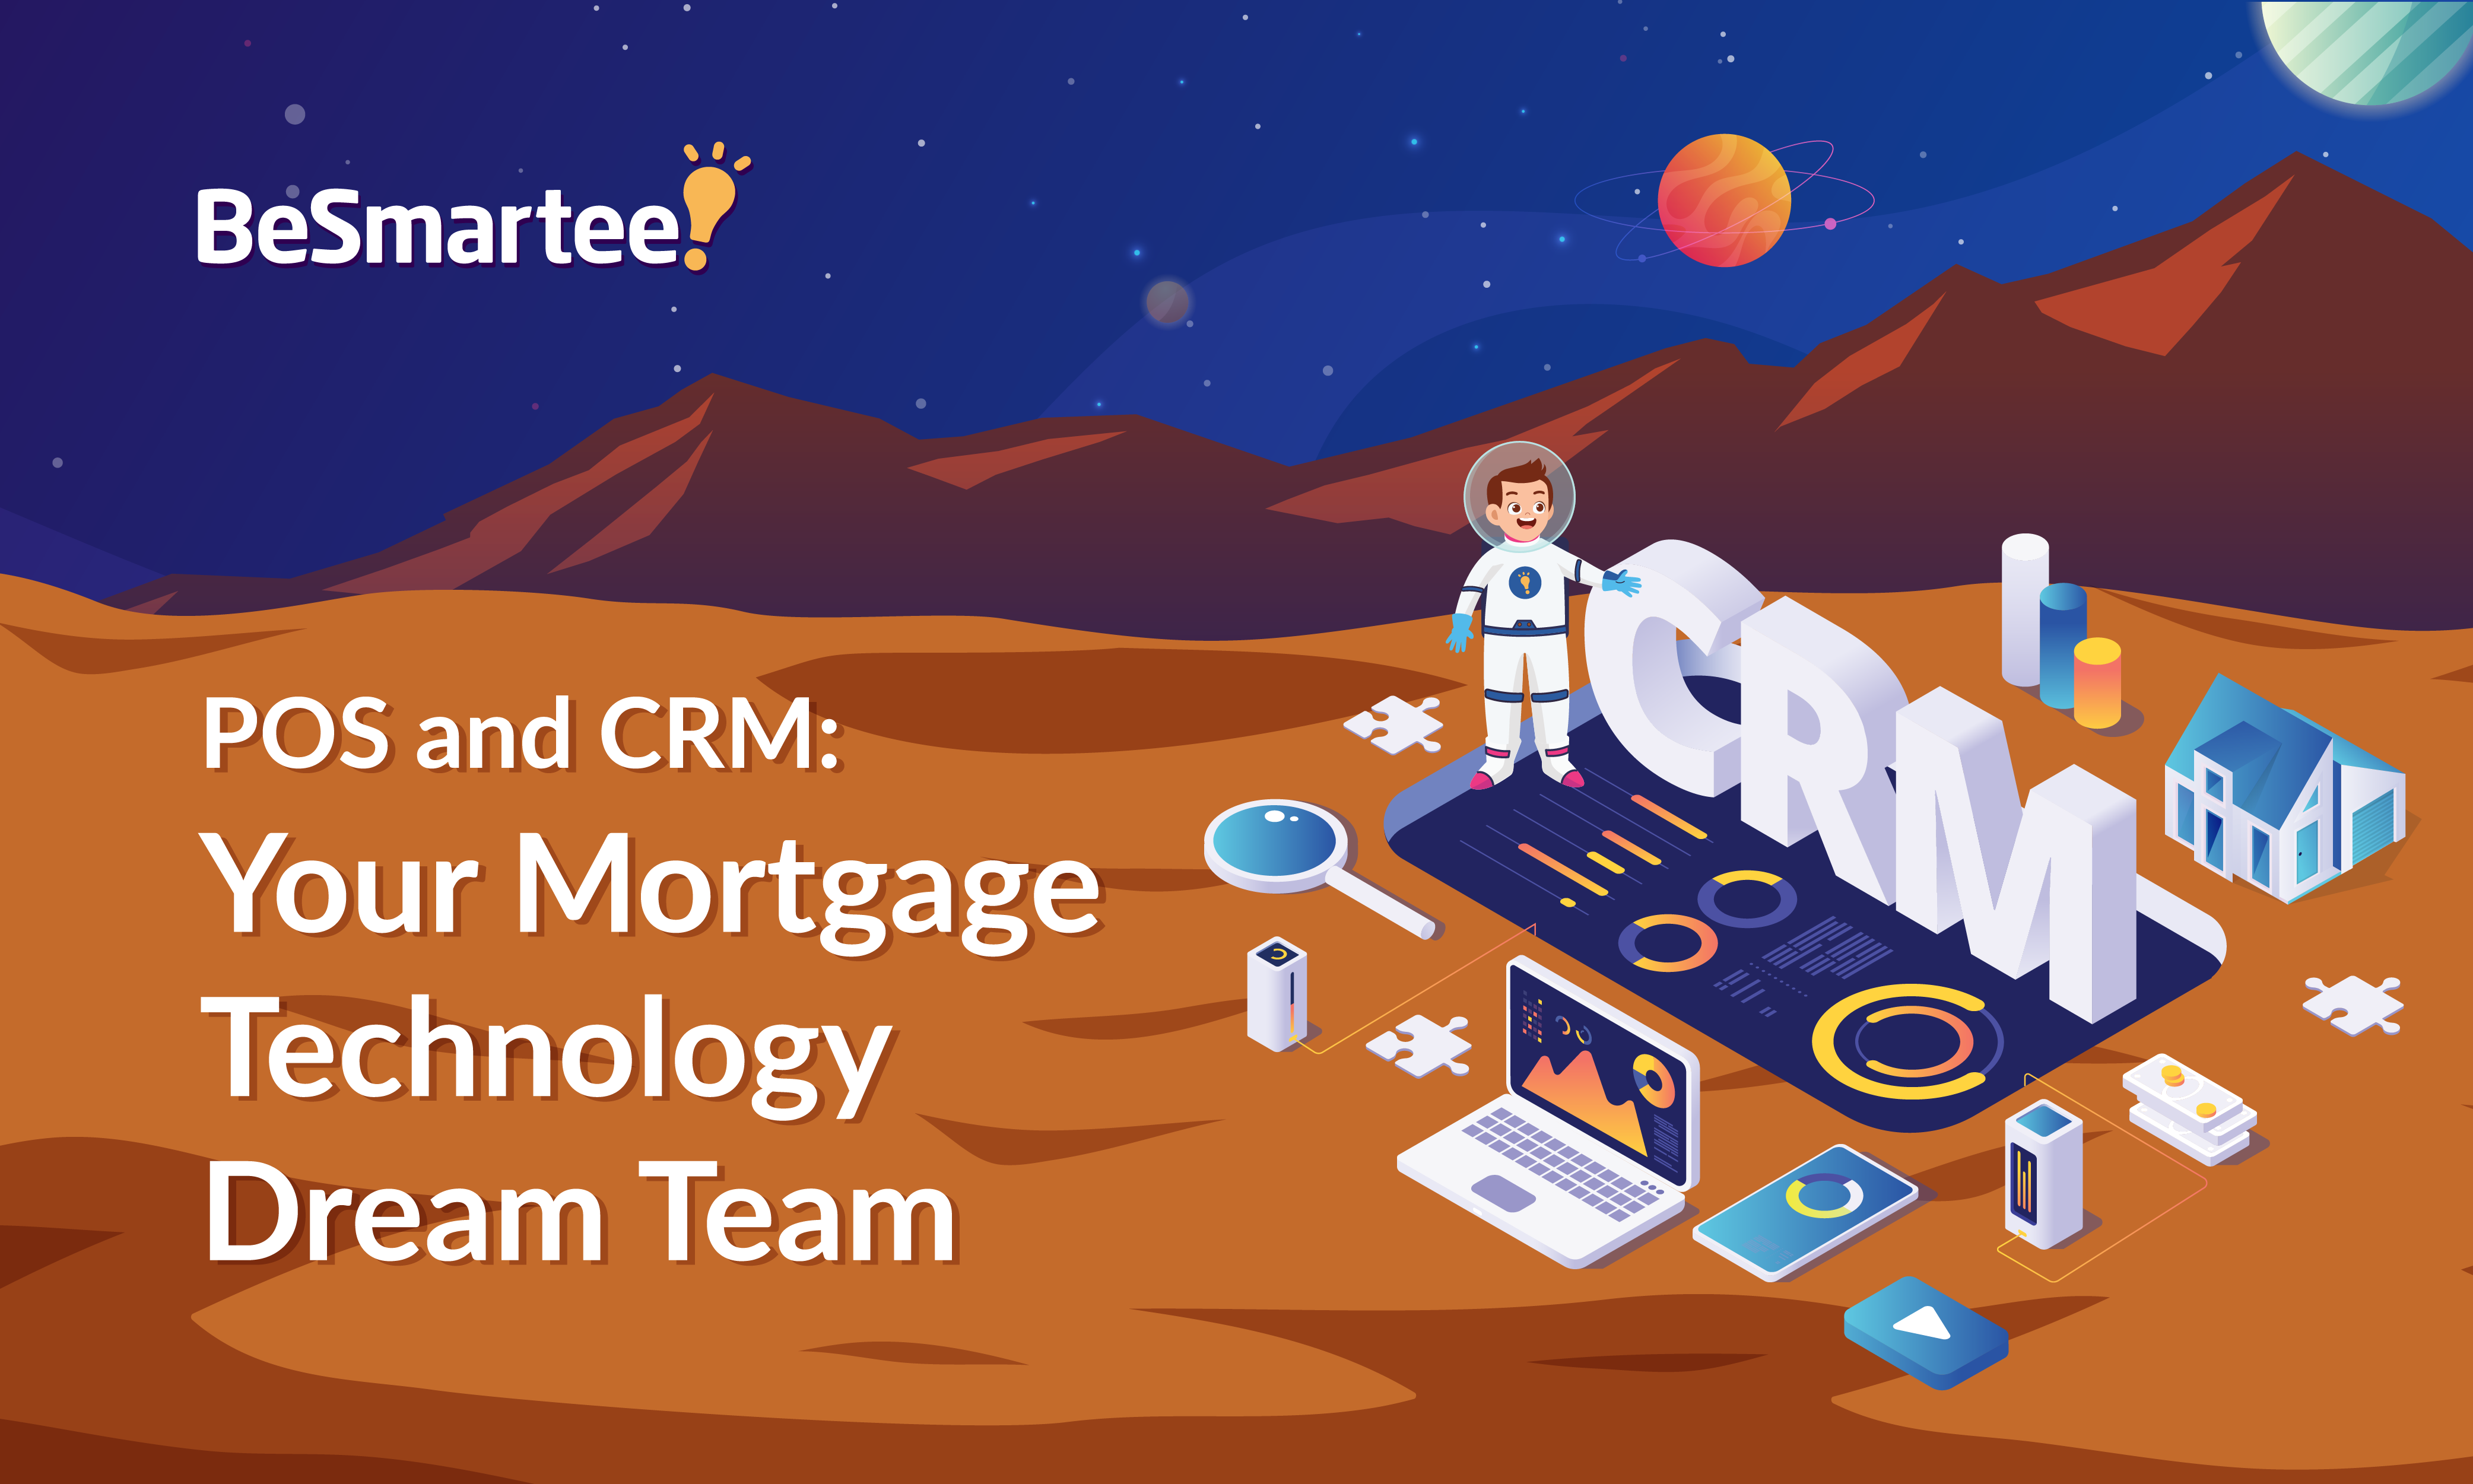 POS and CRM: Your Mortgage Technology Dream Team